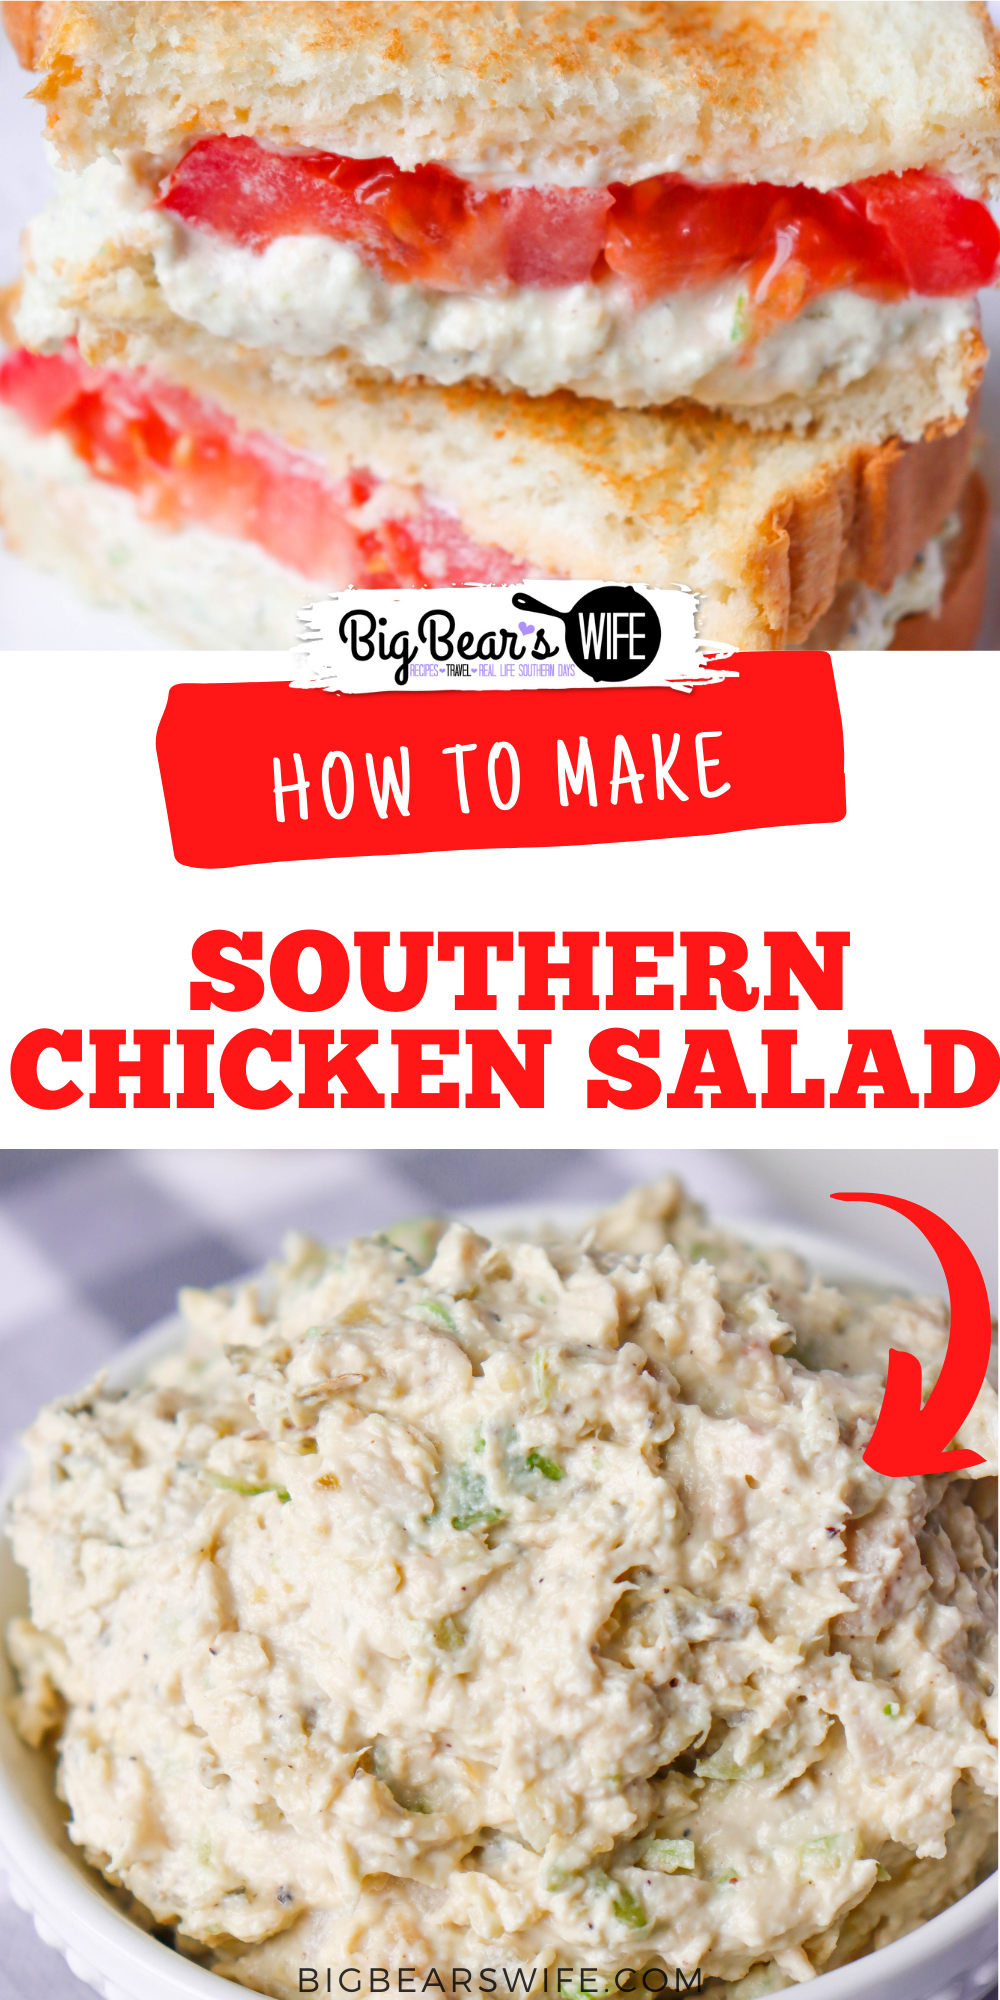 This Southern Chicken Salad Recipe is great for Chicken Salad Sandwiches or as a spread for crackers. My Southern Chicken Salad Recipe is my copycat version of the famous Midtown Market Chicken Salad!  via @bigbearswife